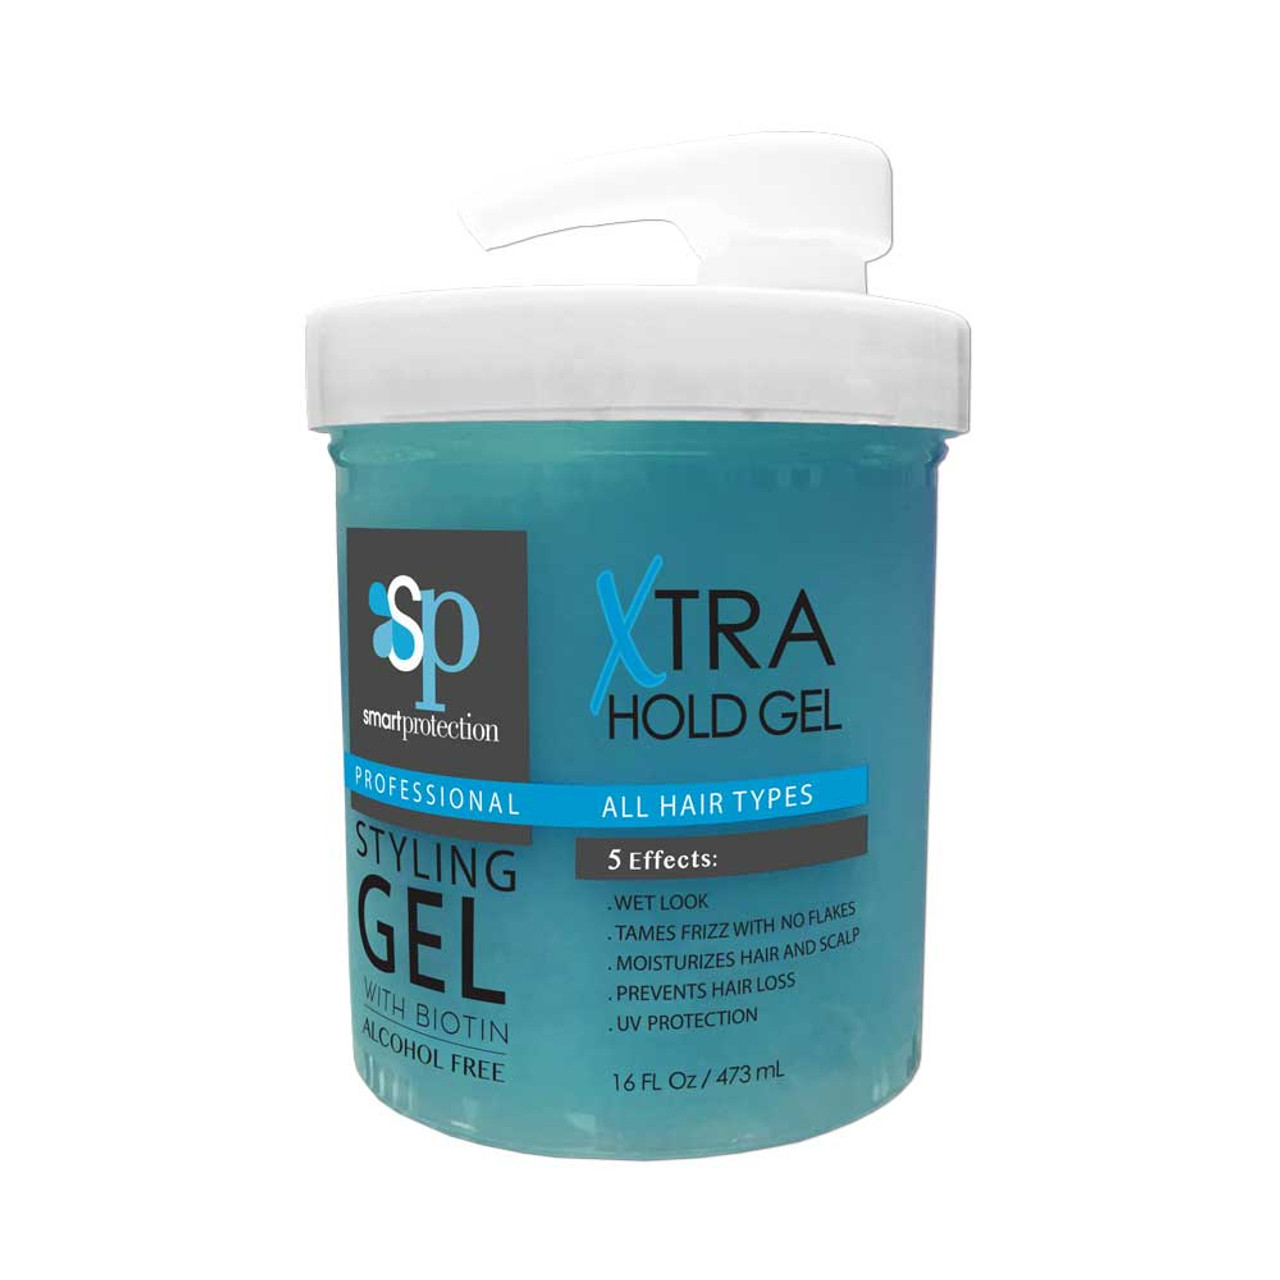 Xtra Hold Gel 16 oz by Smart Protection